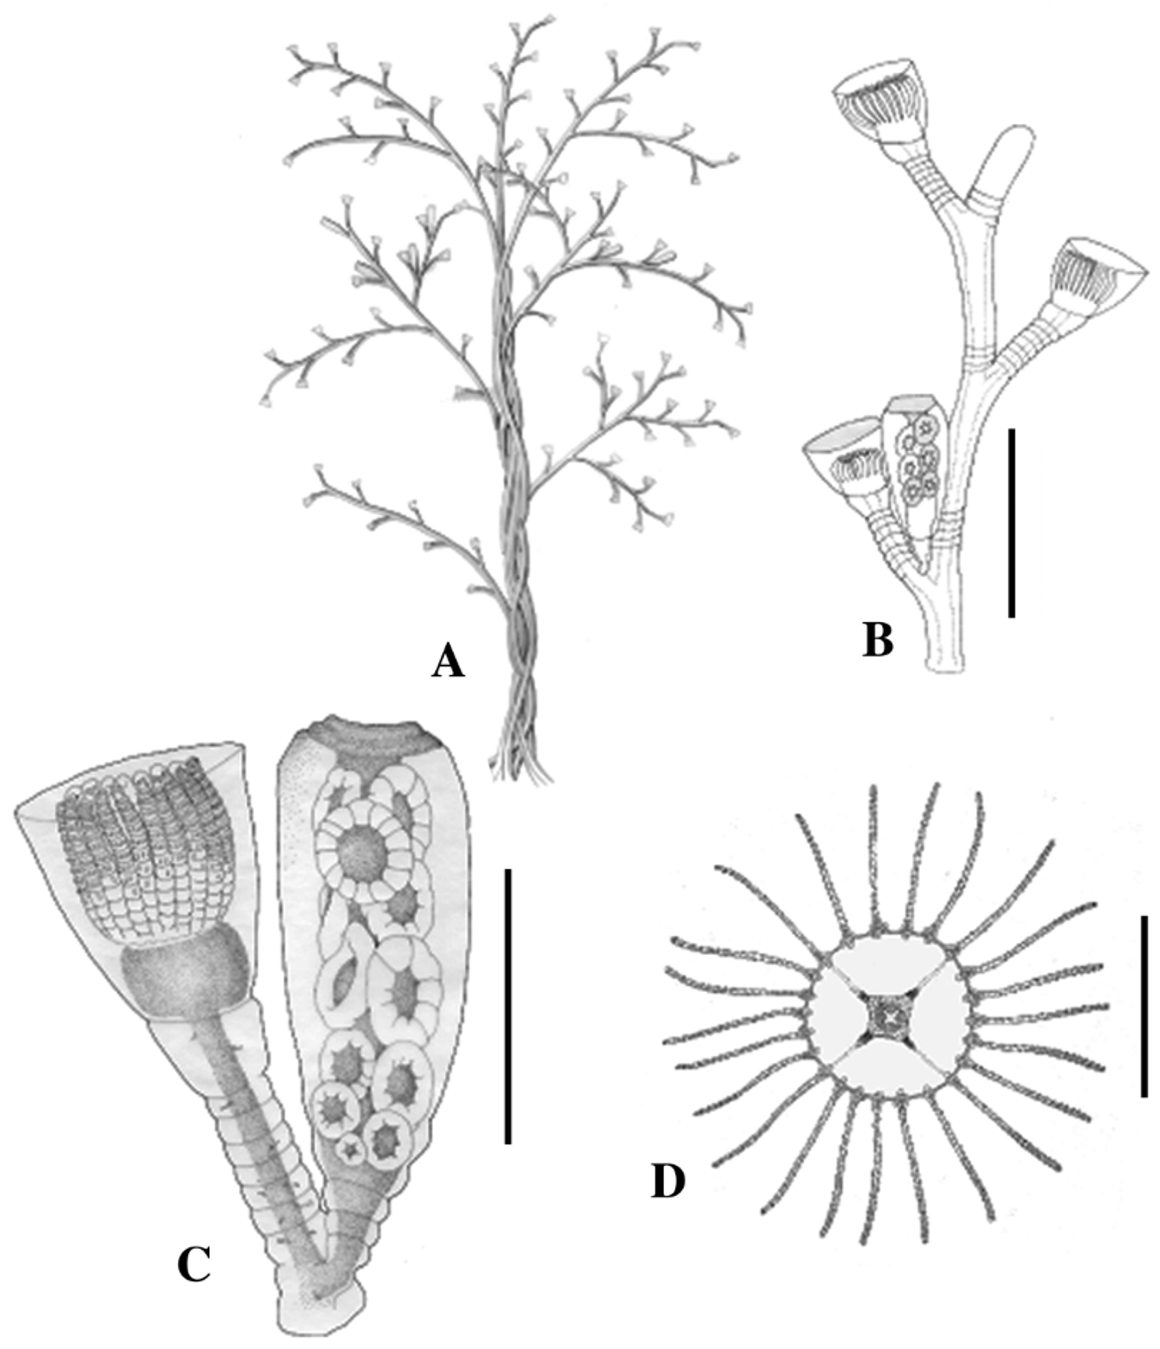 obelia hydroid labeled